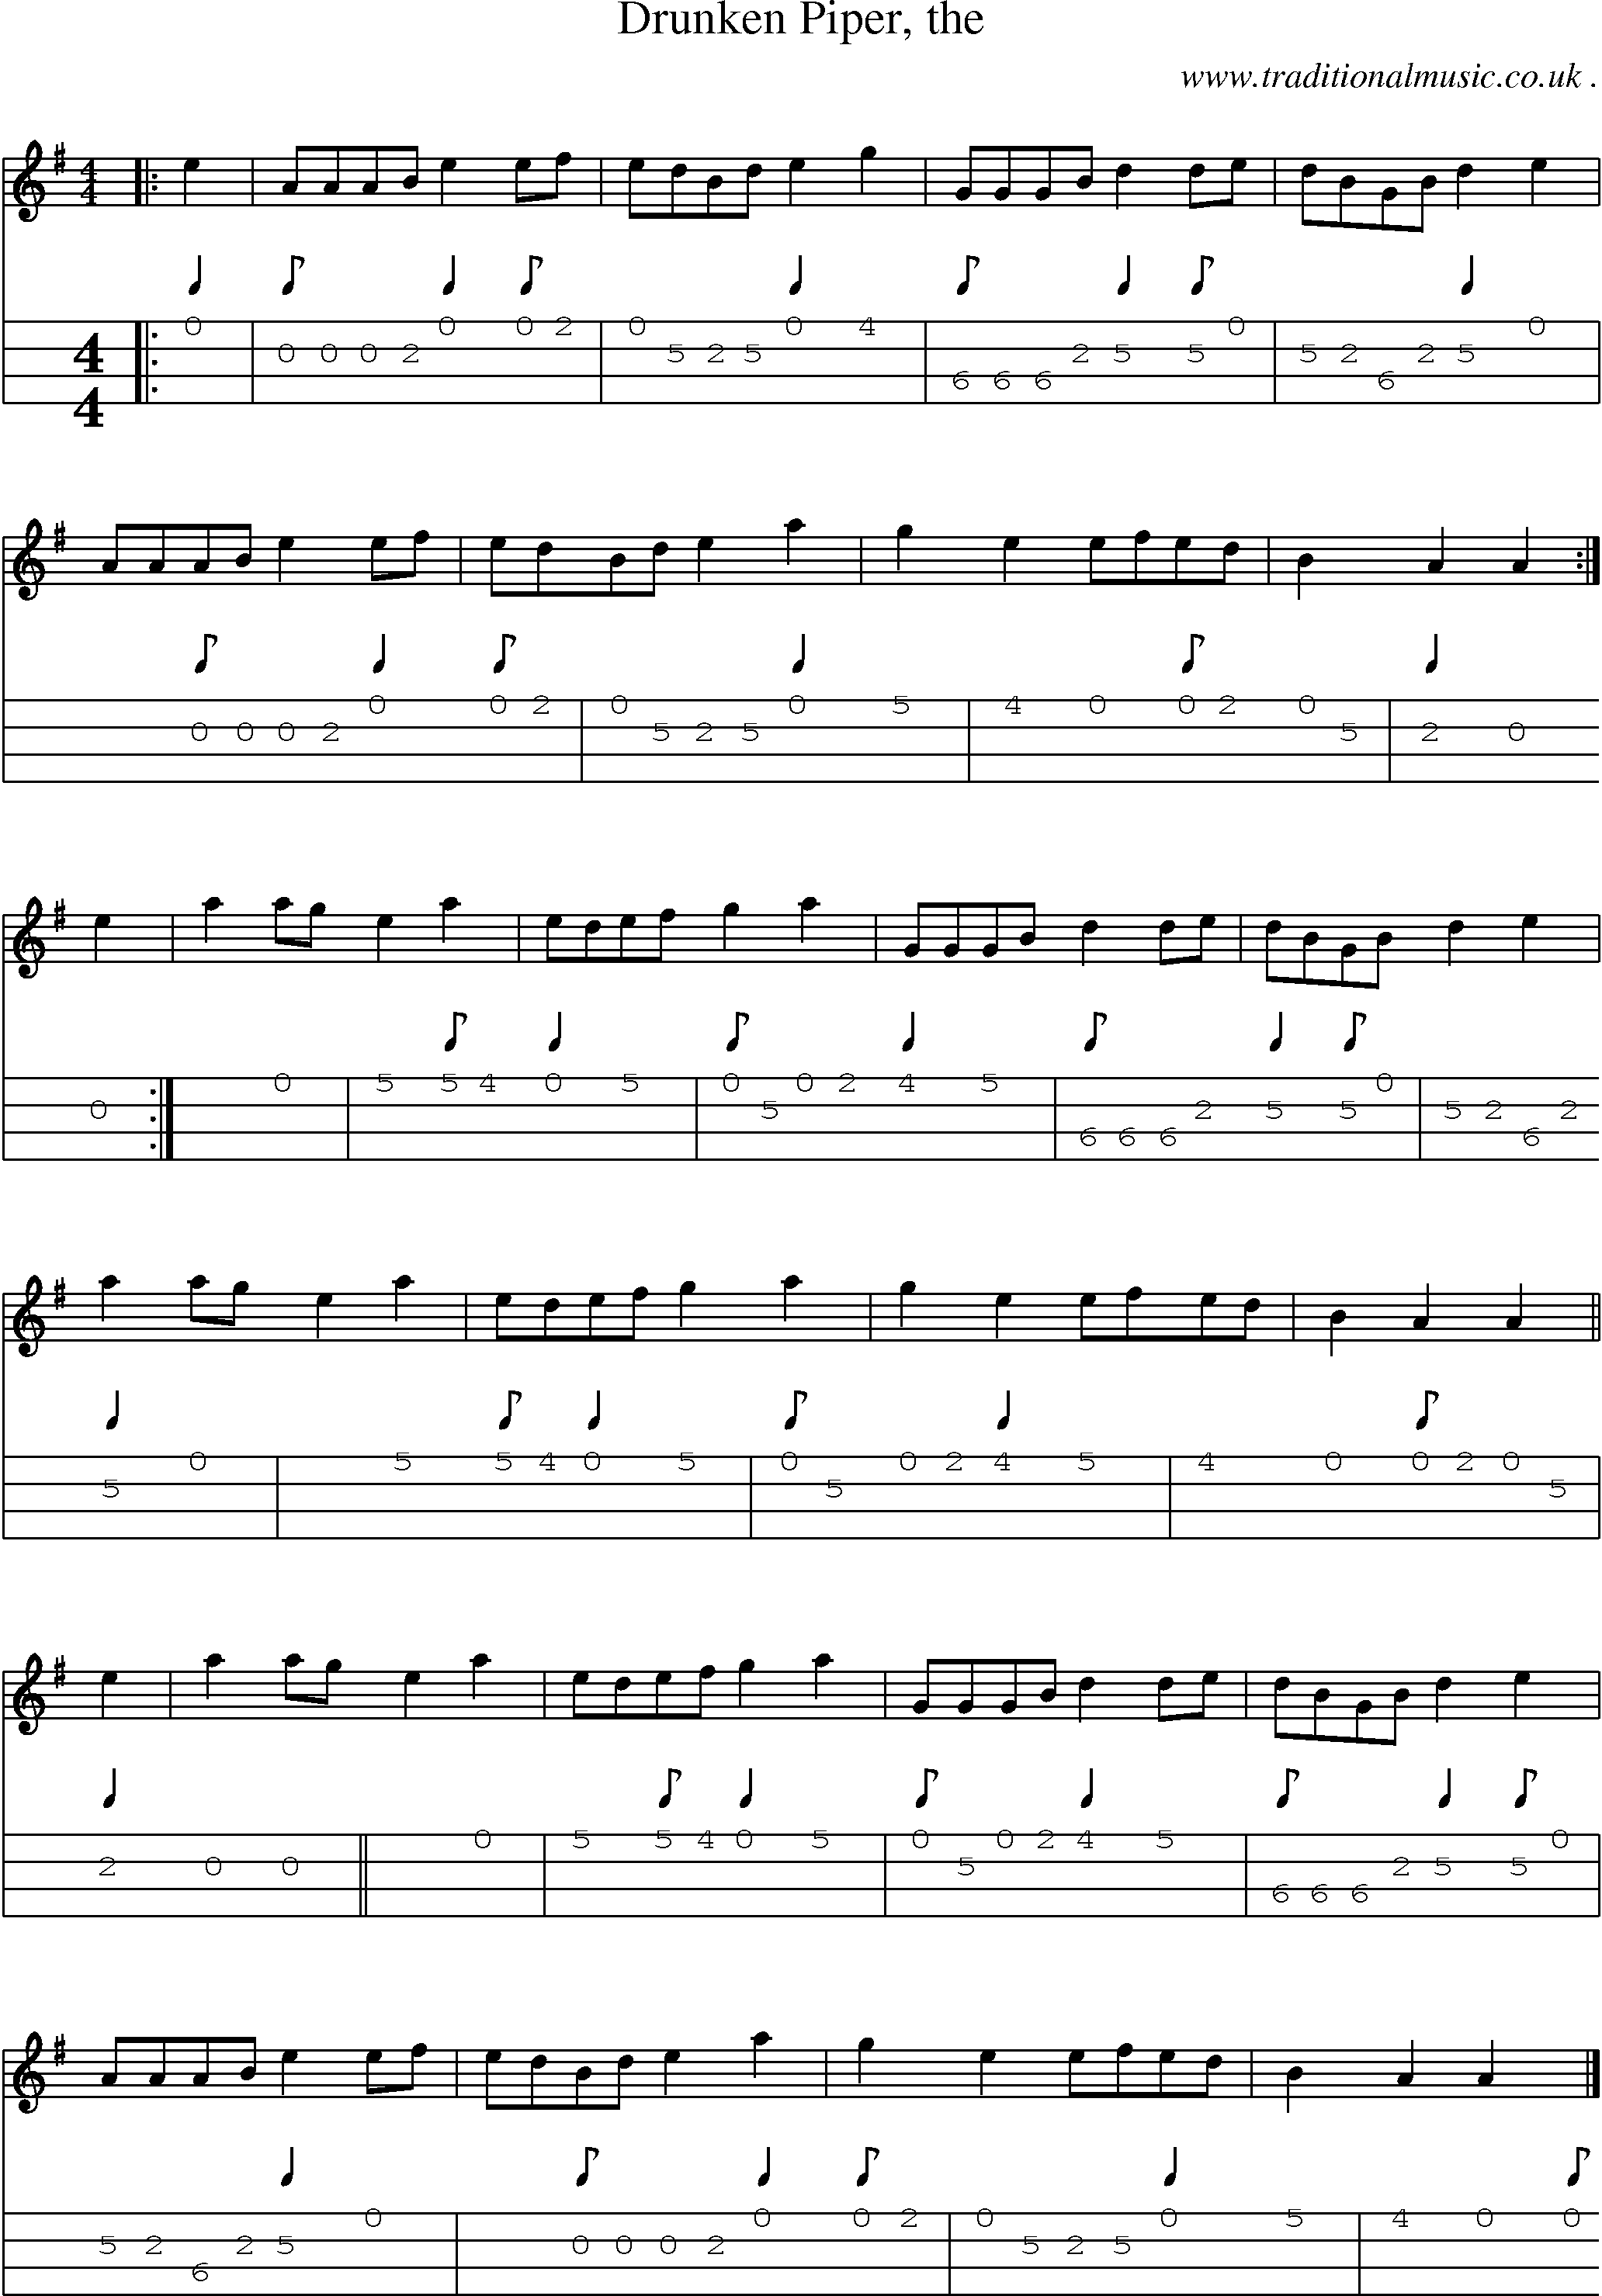 Sheet-music  score, Chords and Mandolin Tabs for Drunken Piper The